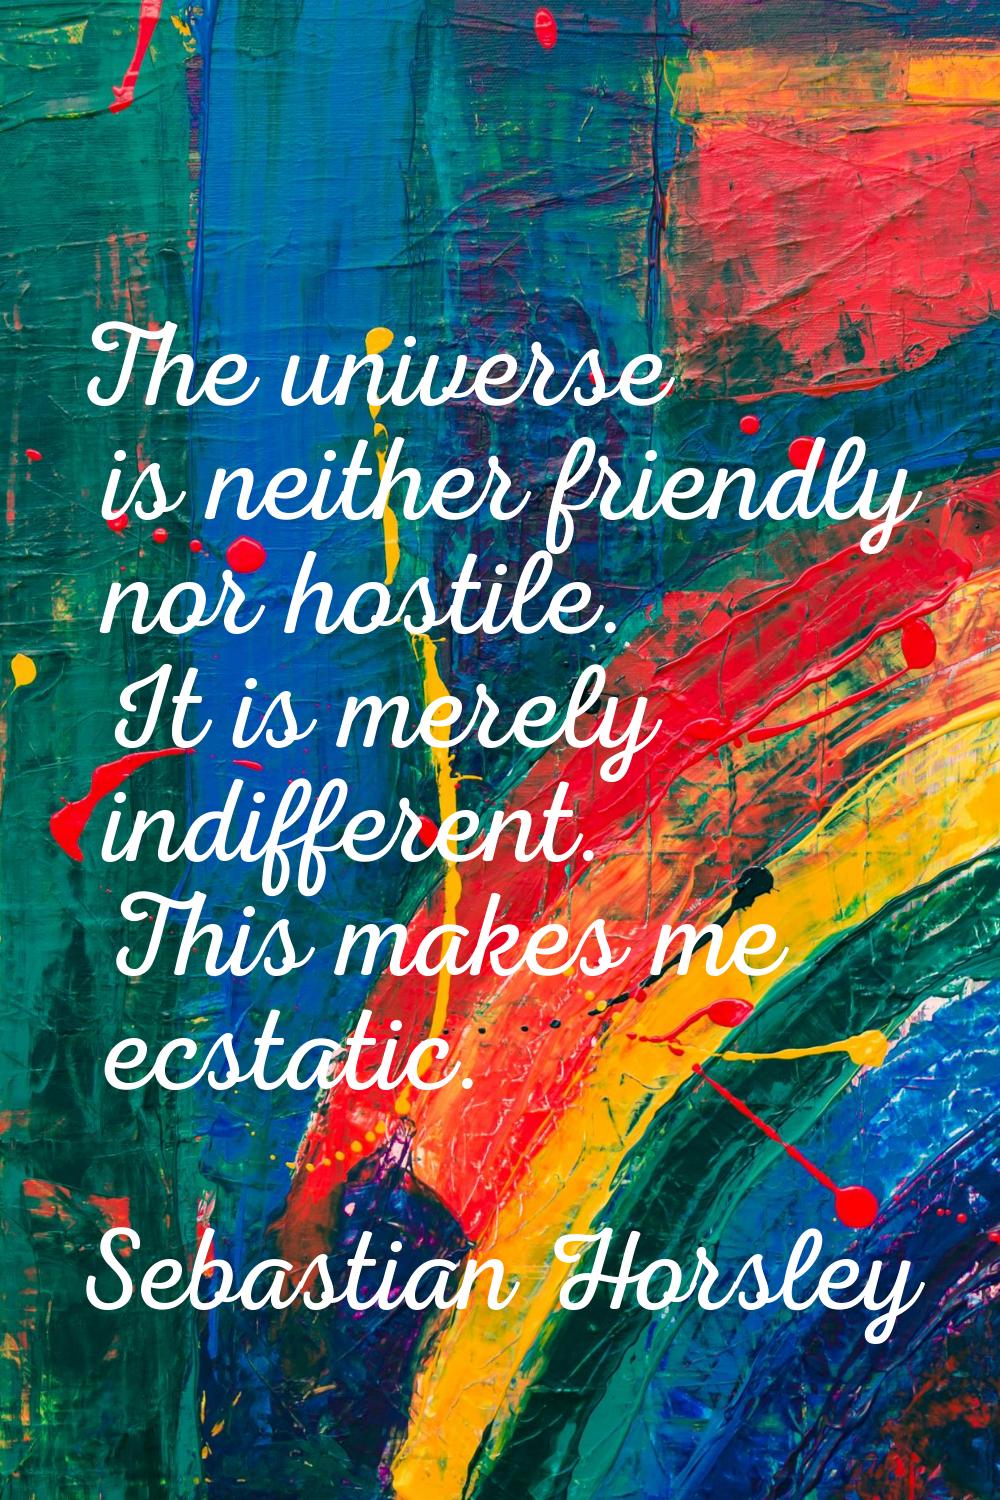 The universe is neither friendly nor hostile. It is merely indifferent. This makes me ecstatic.